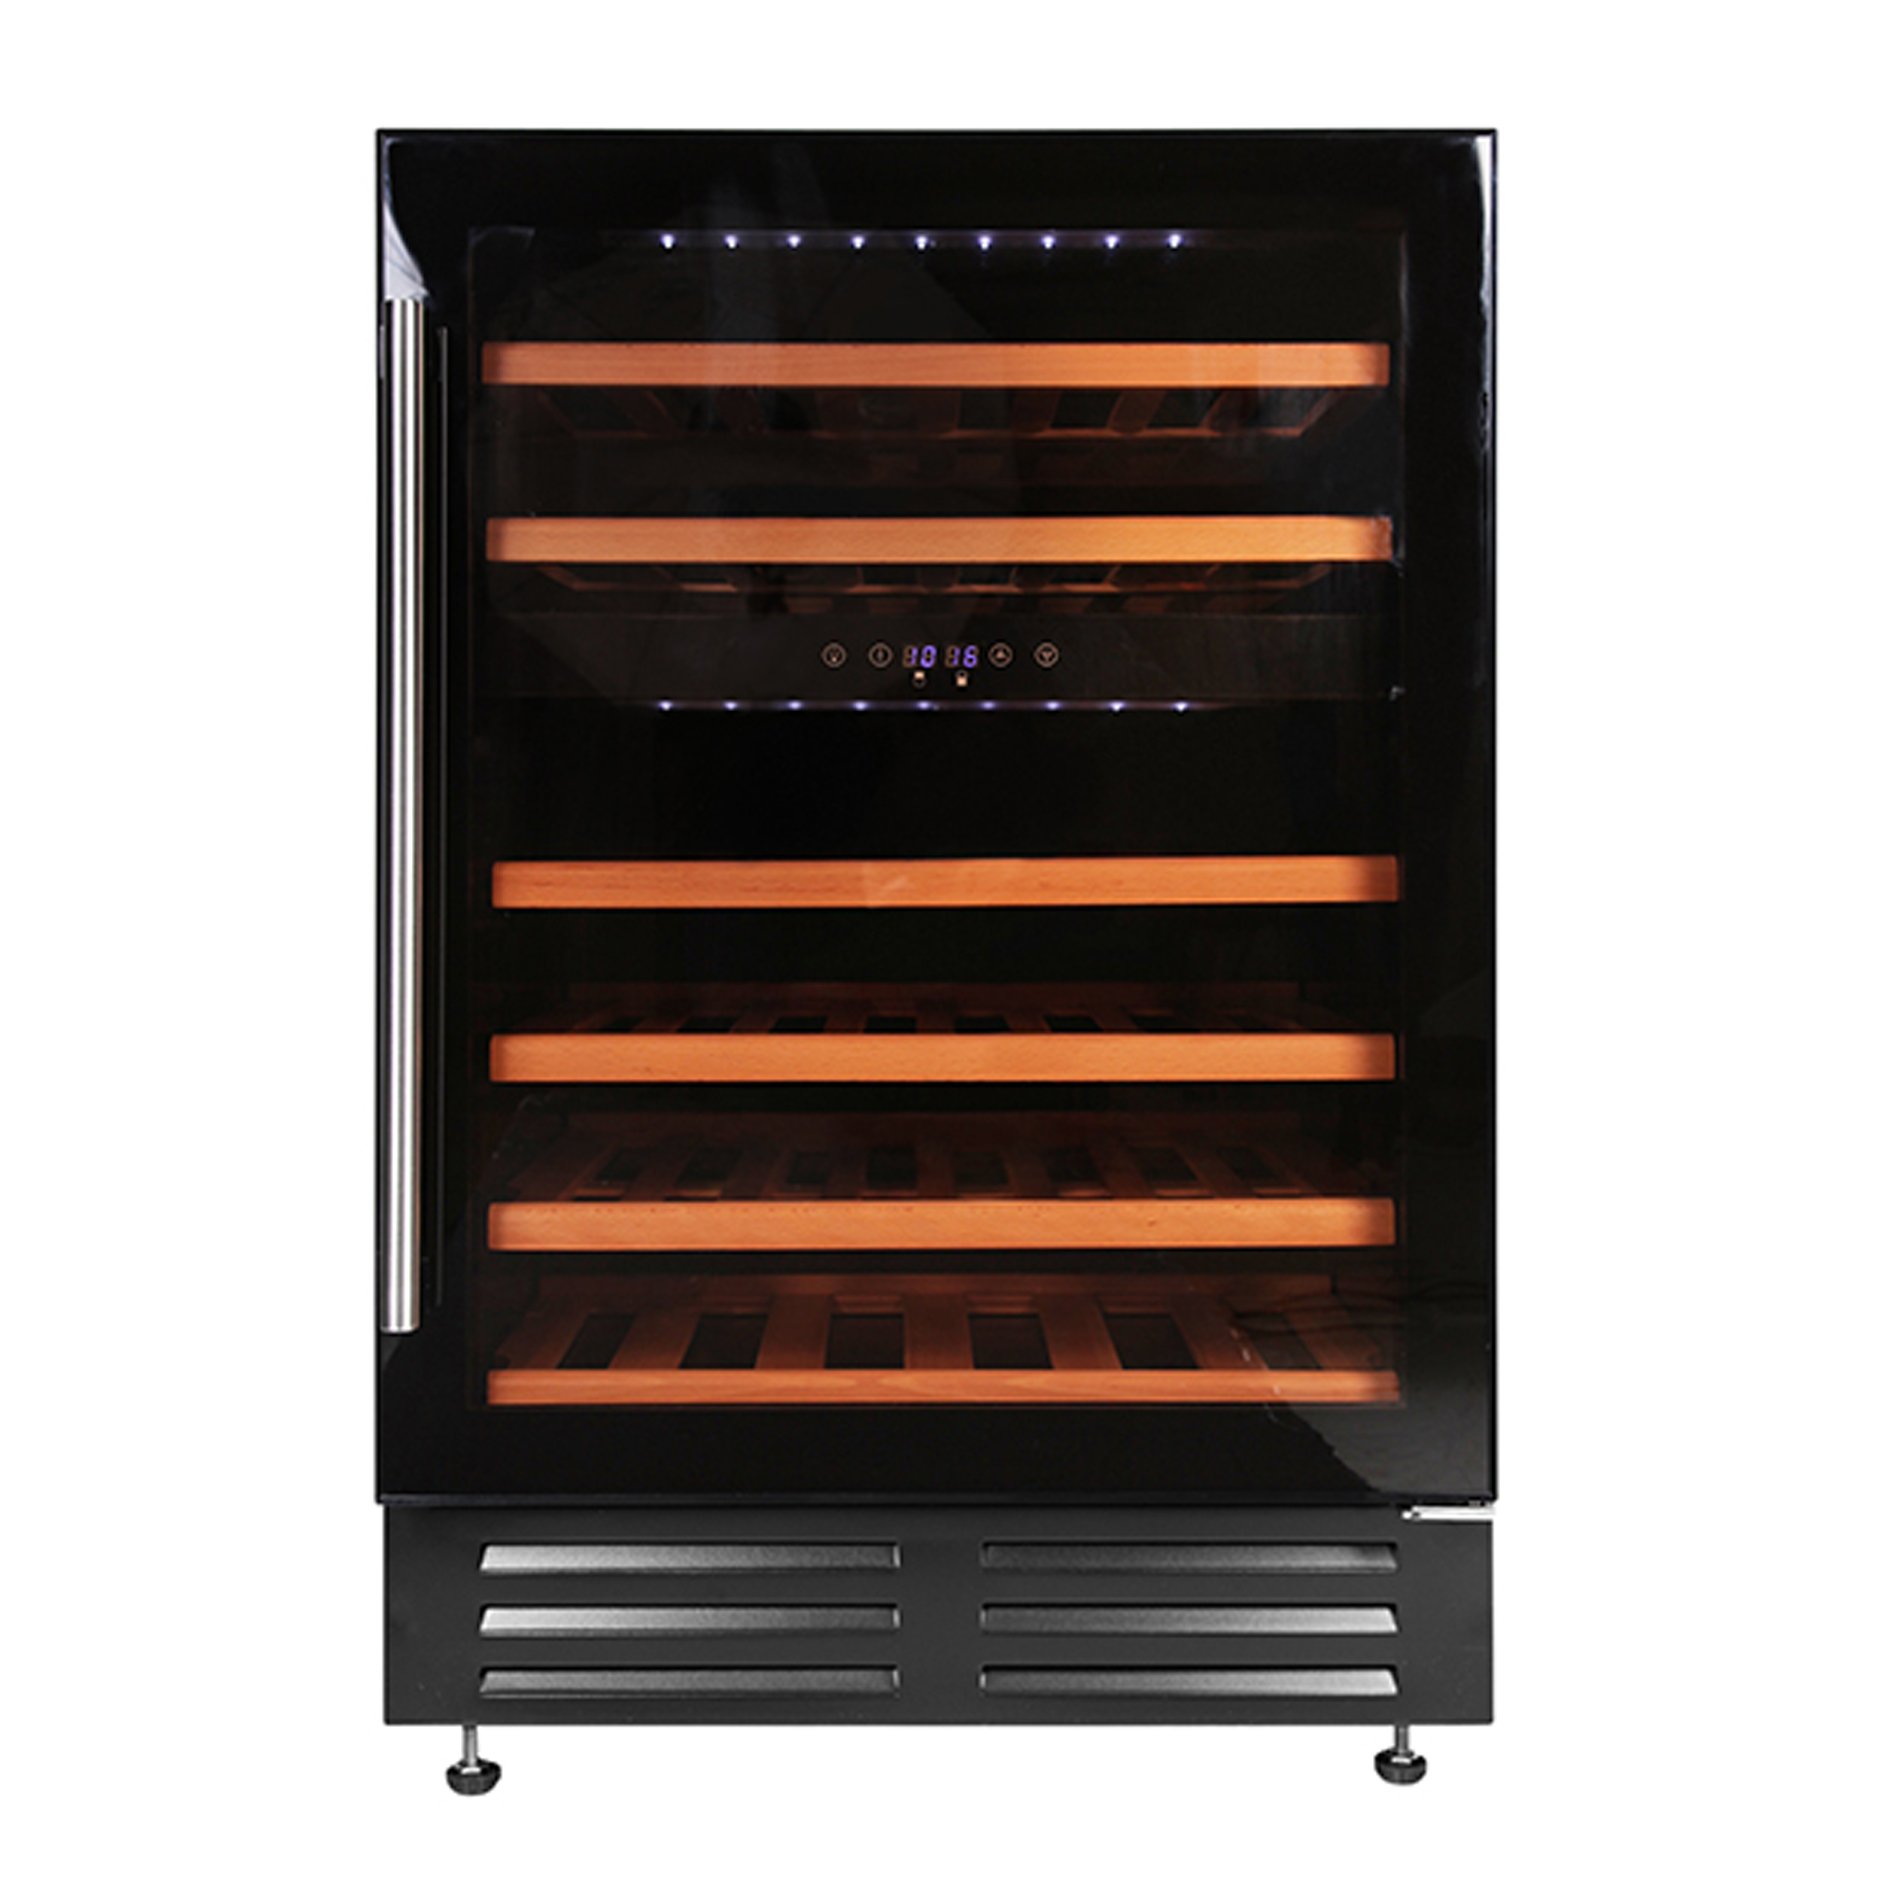 Integrated 60cm wine cooler has a 145 litre capacity which equates to approximately 46 bottles. Features include CFC/HFC free, adjustable thermostat and digital temp display.